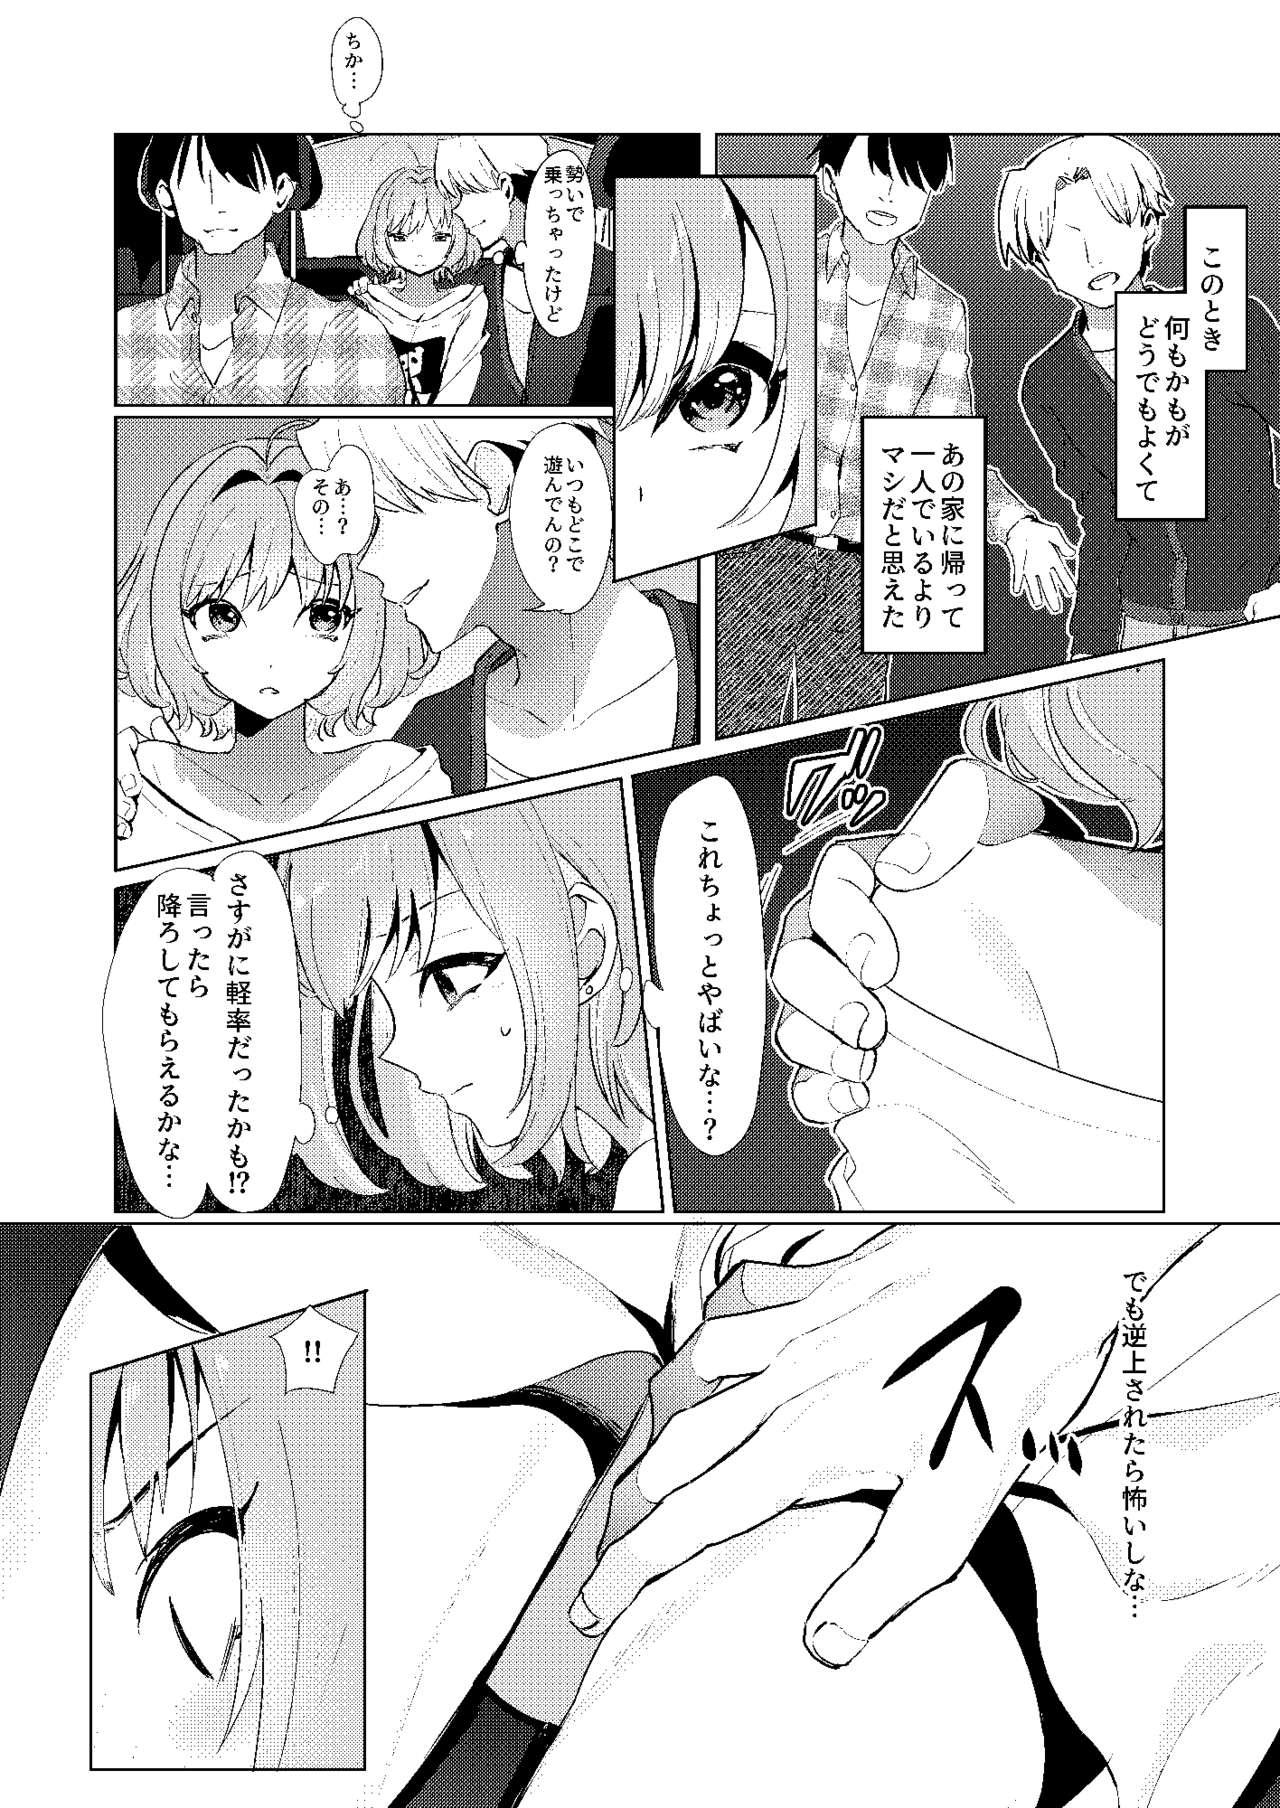 Office Sex 夢〇りあむの青春 - The idolmaster Sex Toy - Page 11